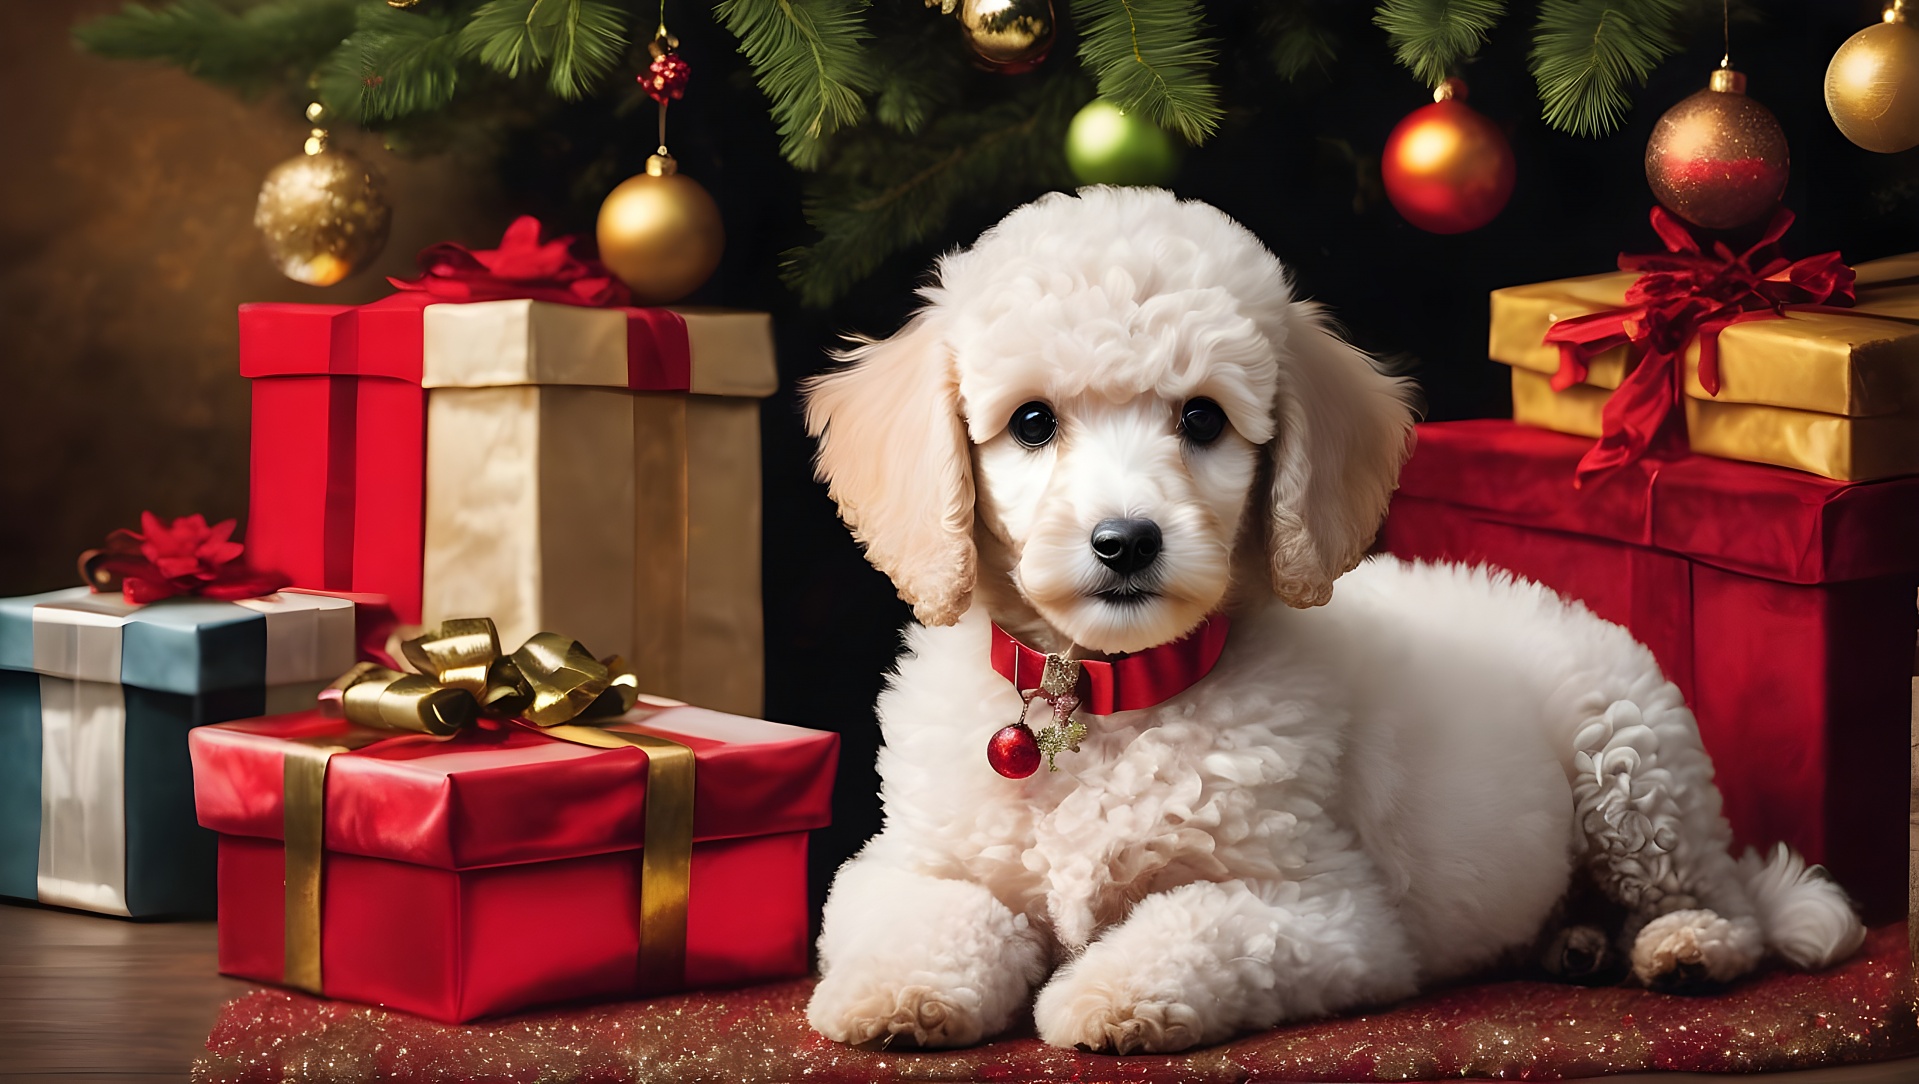 dog-poodle-christmas-card-free-stock-photo-public-domain-pictures